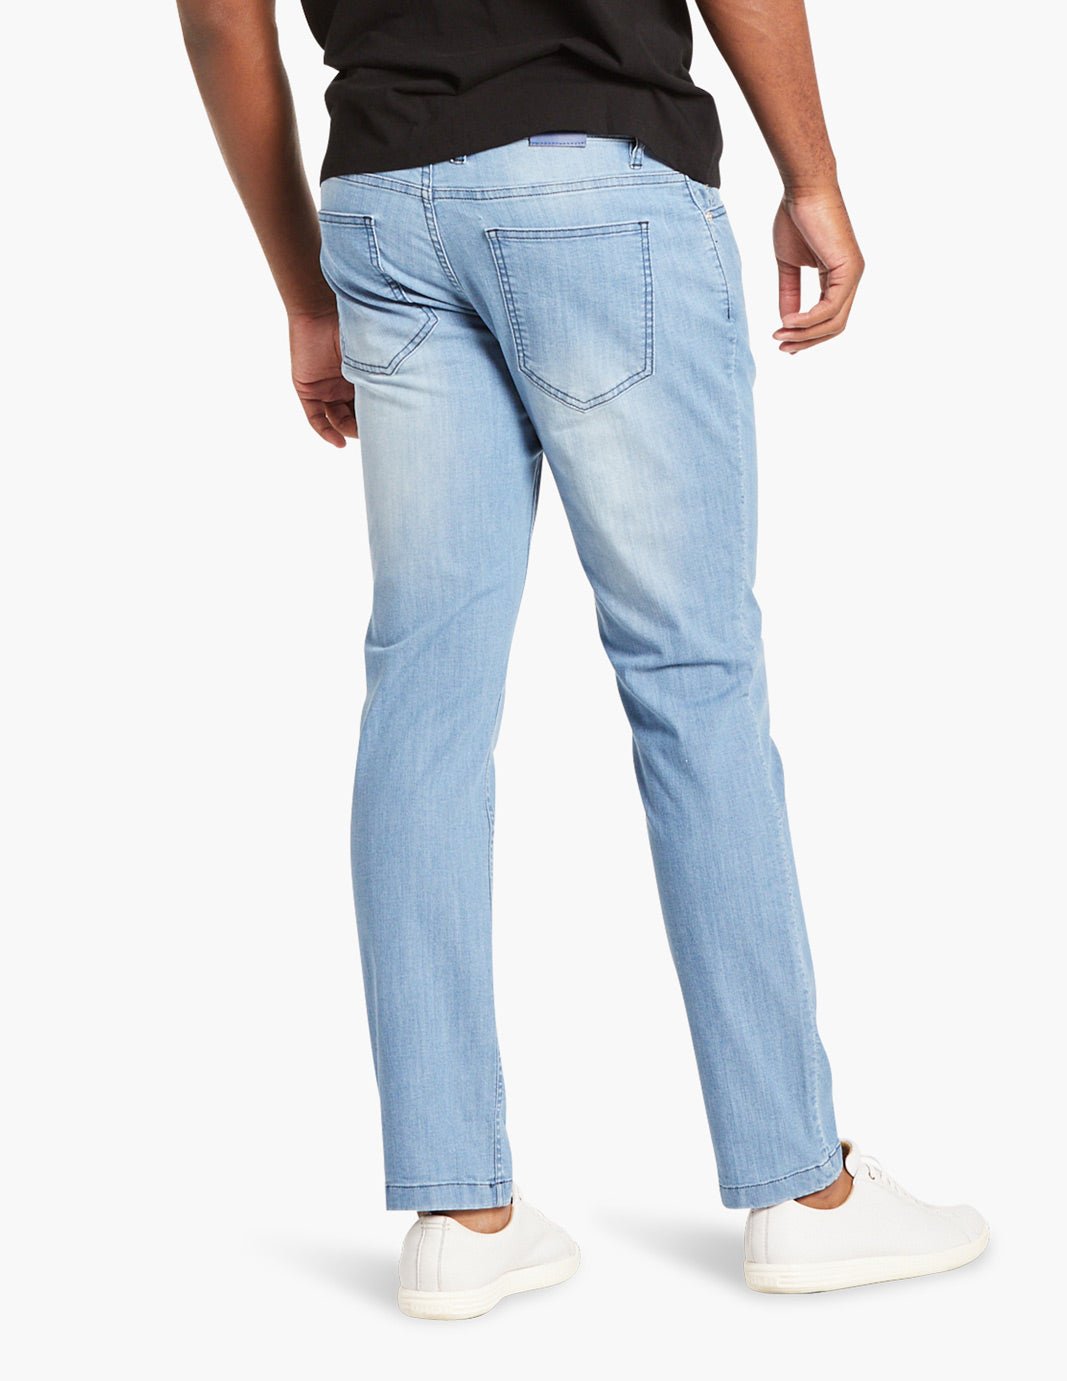 Men's Perfect Jeans (Buy 2 free shipping) mysite